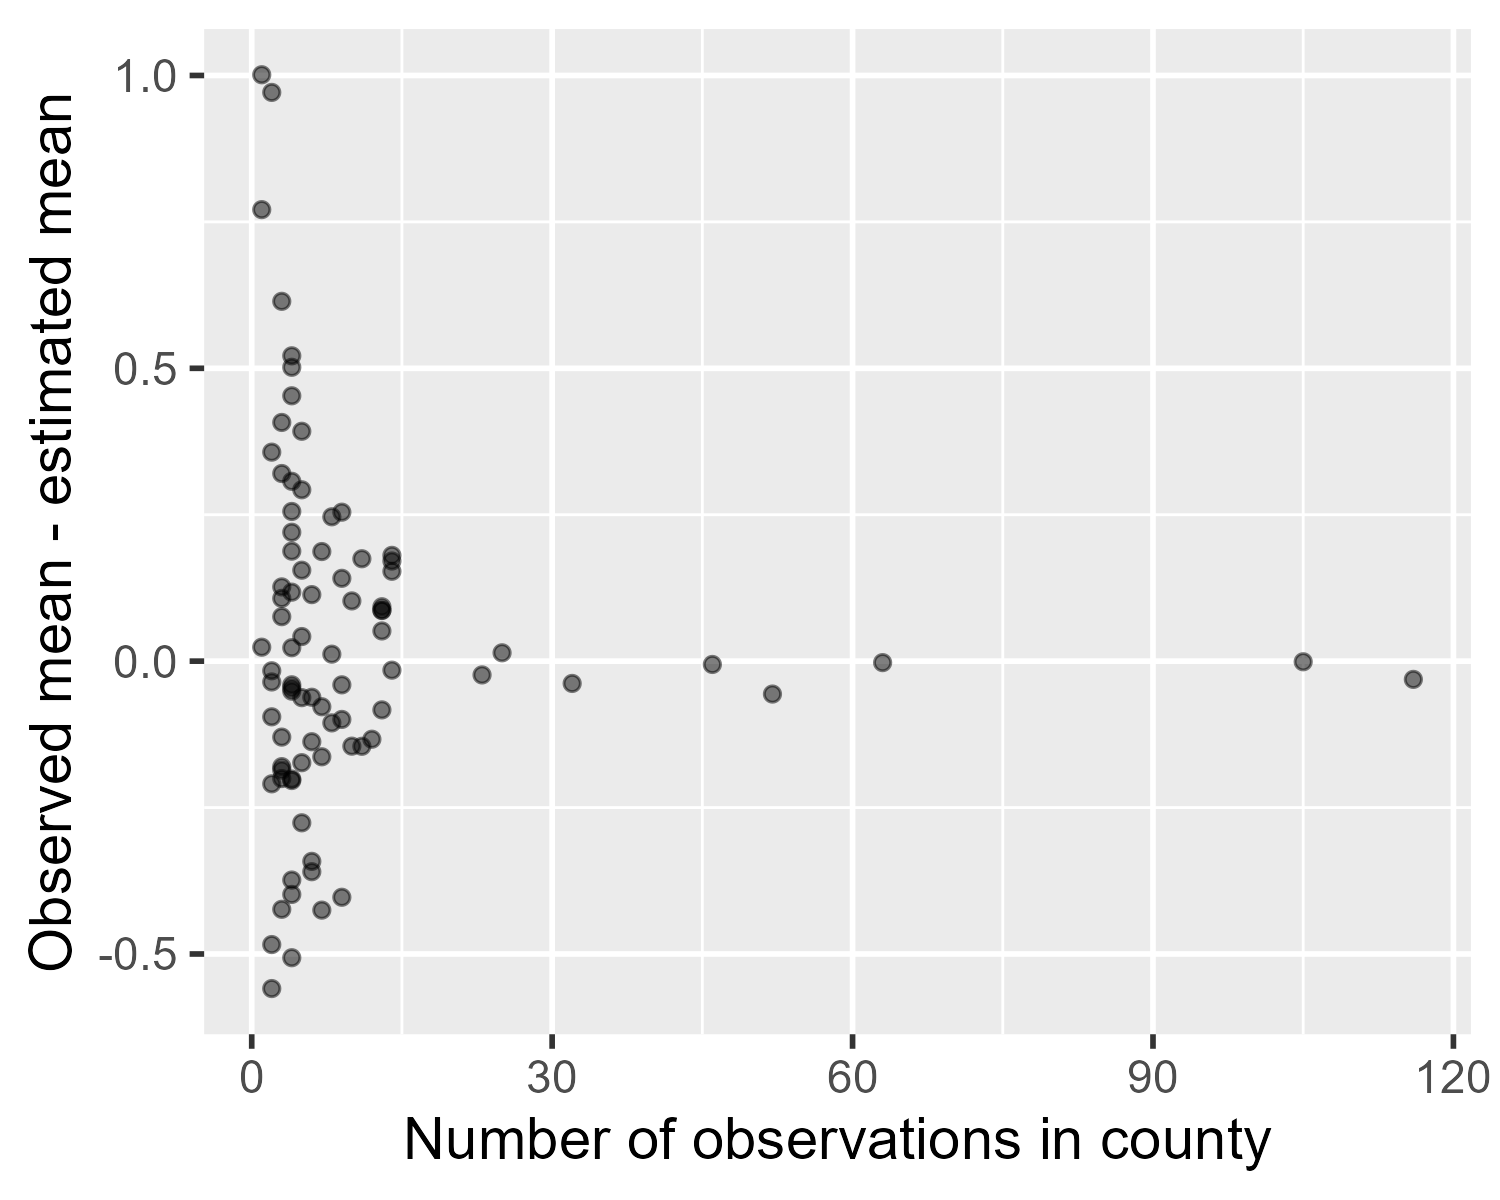 Plot with number of observations on the x axis and the difference between the observed and estimated means on the y axis. There is a smaller difference for counties with more data.